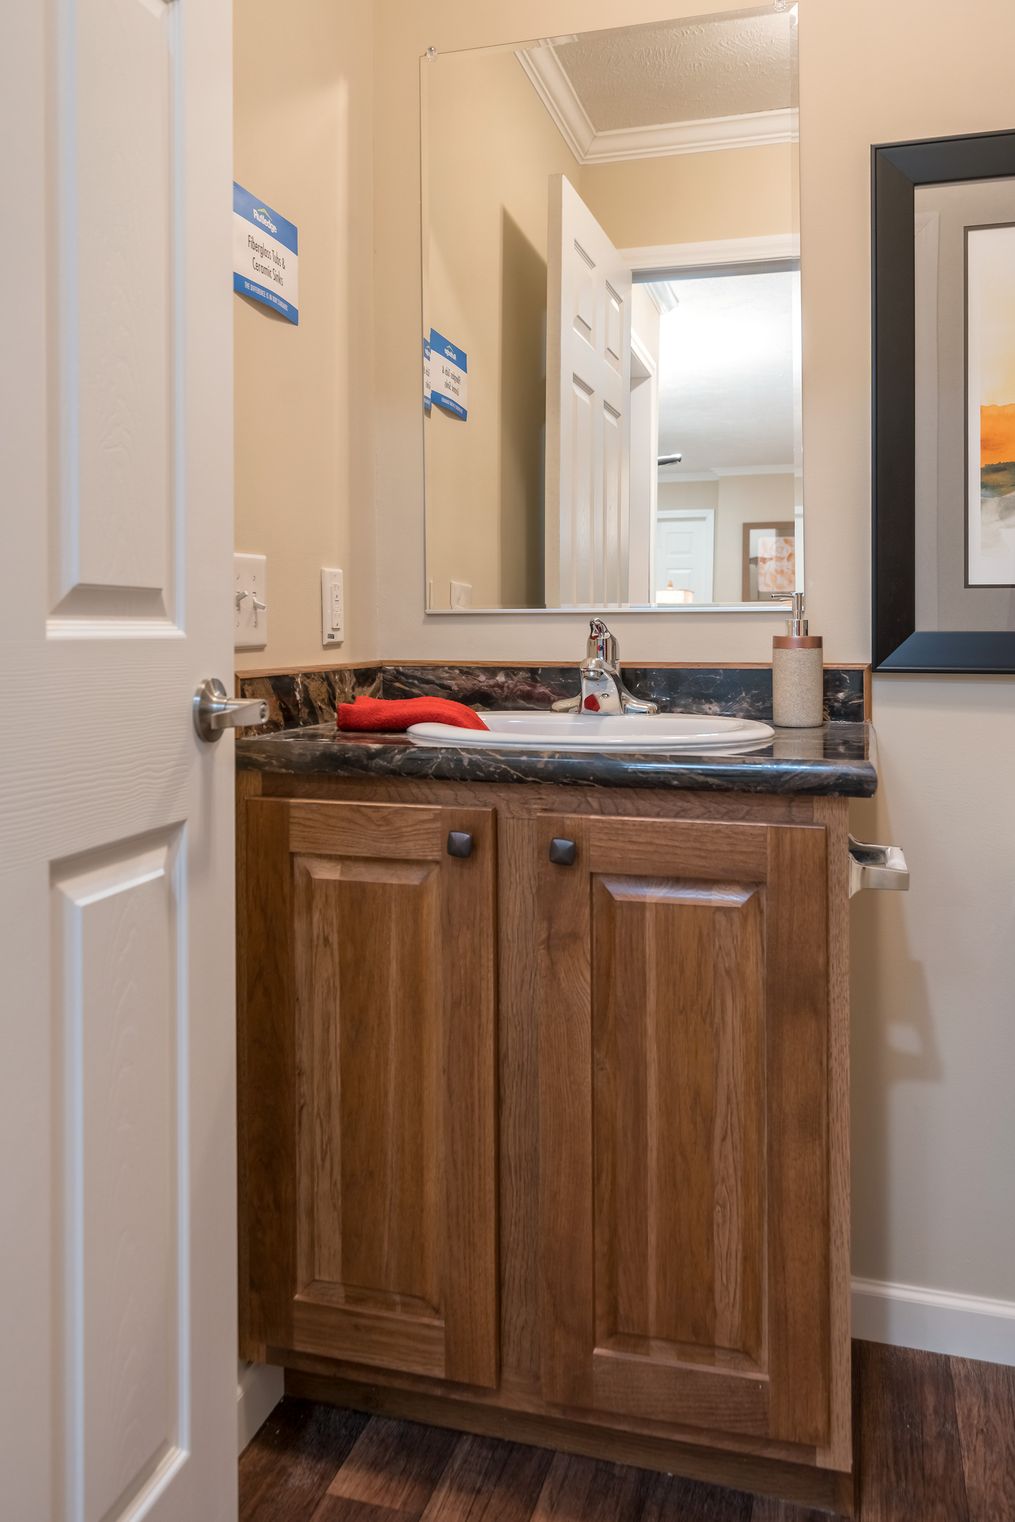 The BROOKLINE FLEX Guest Bathroom. This Manufactured Mobile Home features 4 bedrooms and 2 baths.